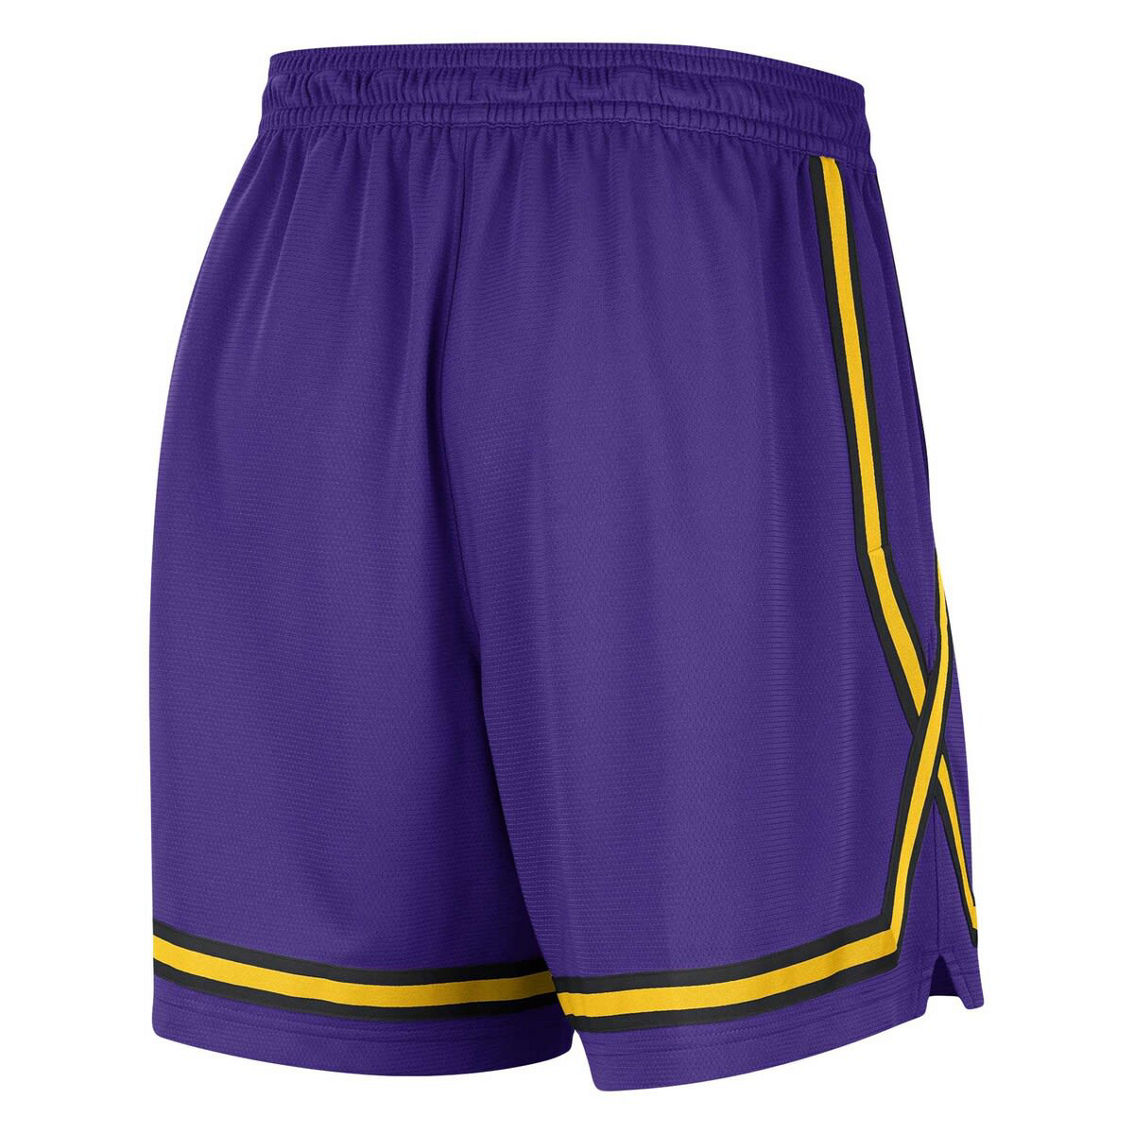 Nike Women's Purple Los Angeles Lakers Authentic Crossover Fly Performance Shorts - Image 4 of 4